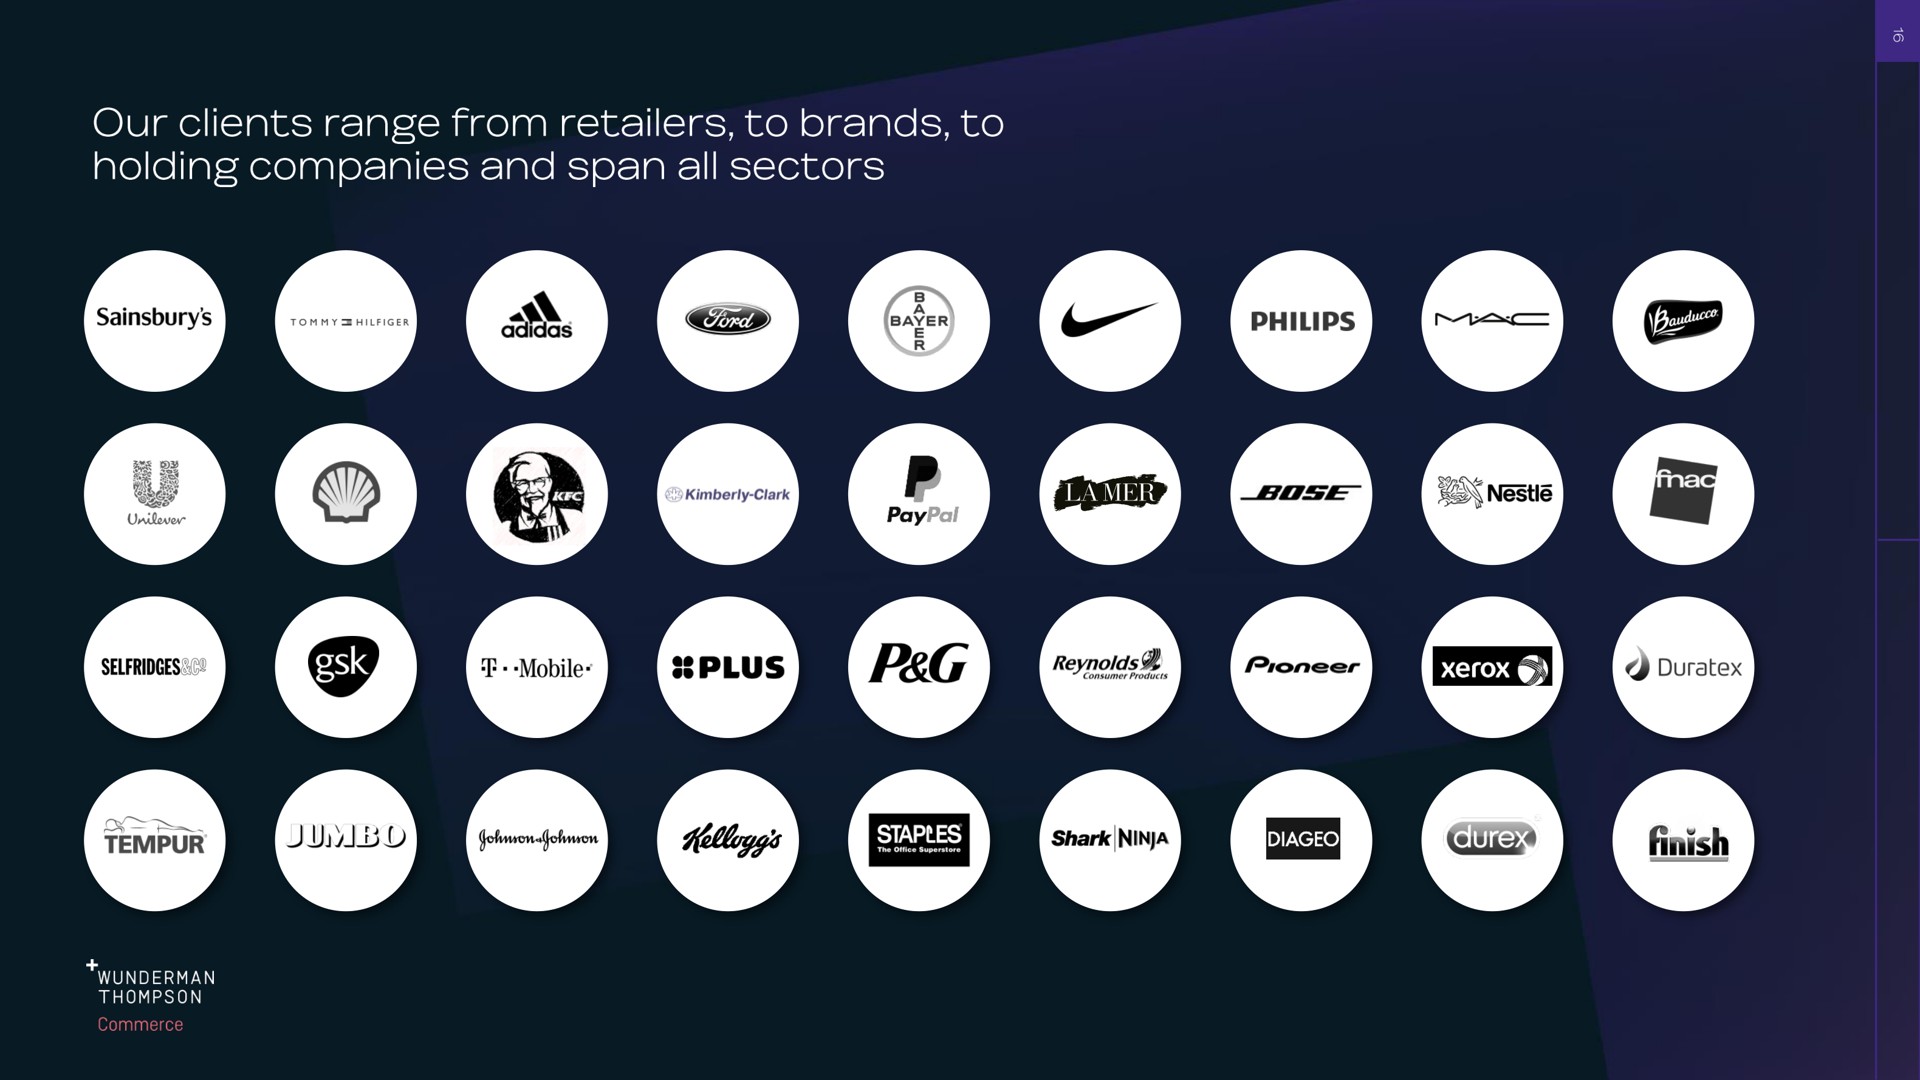 our clients range from retailers to brands to holding companies and span all sectors | WPP